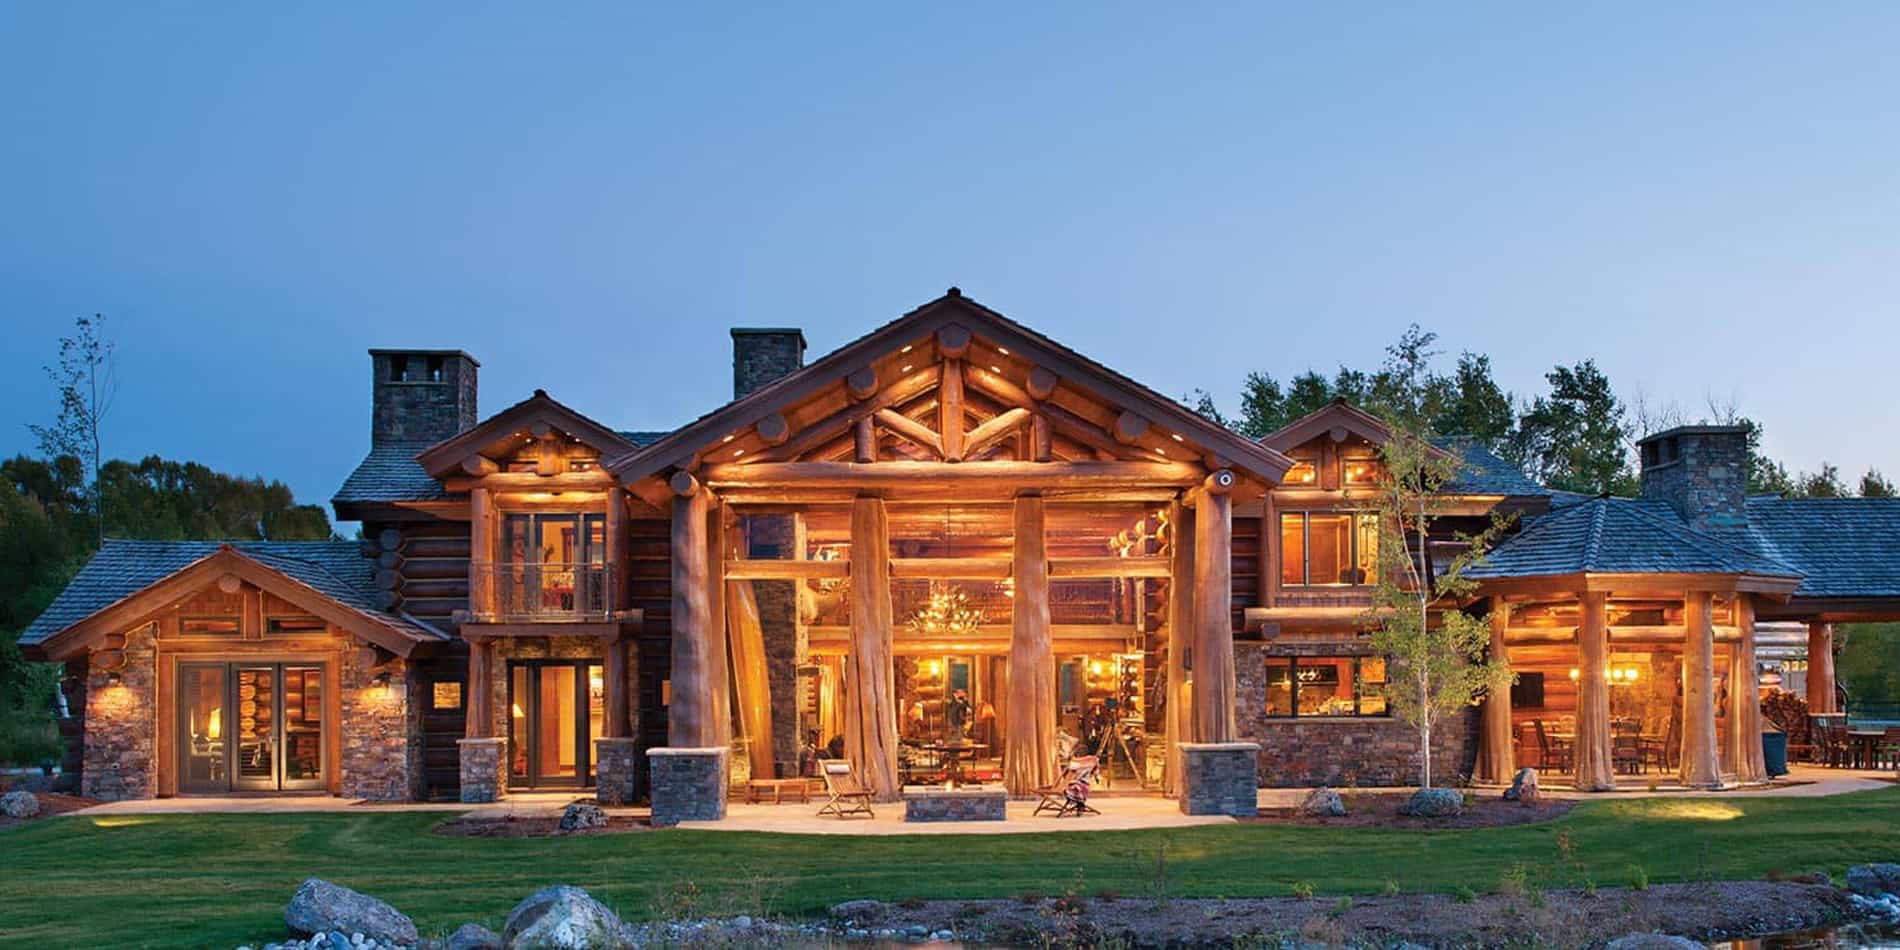 Handcrafted Log Homes Mlled Logs Hand Hewn Logs 